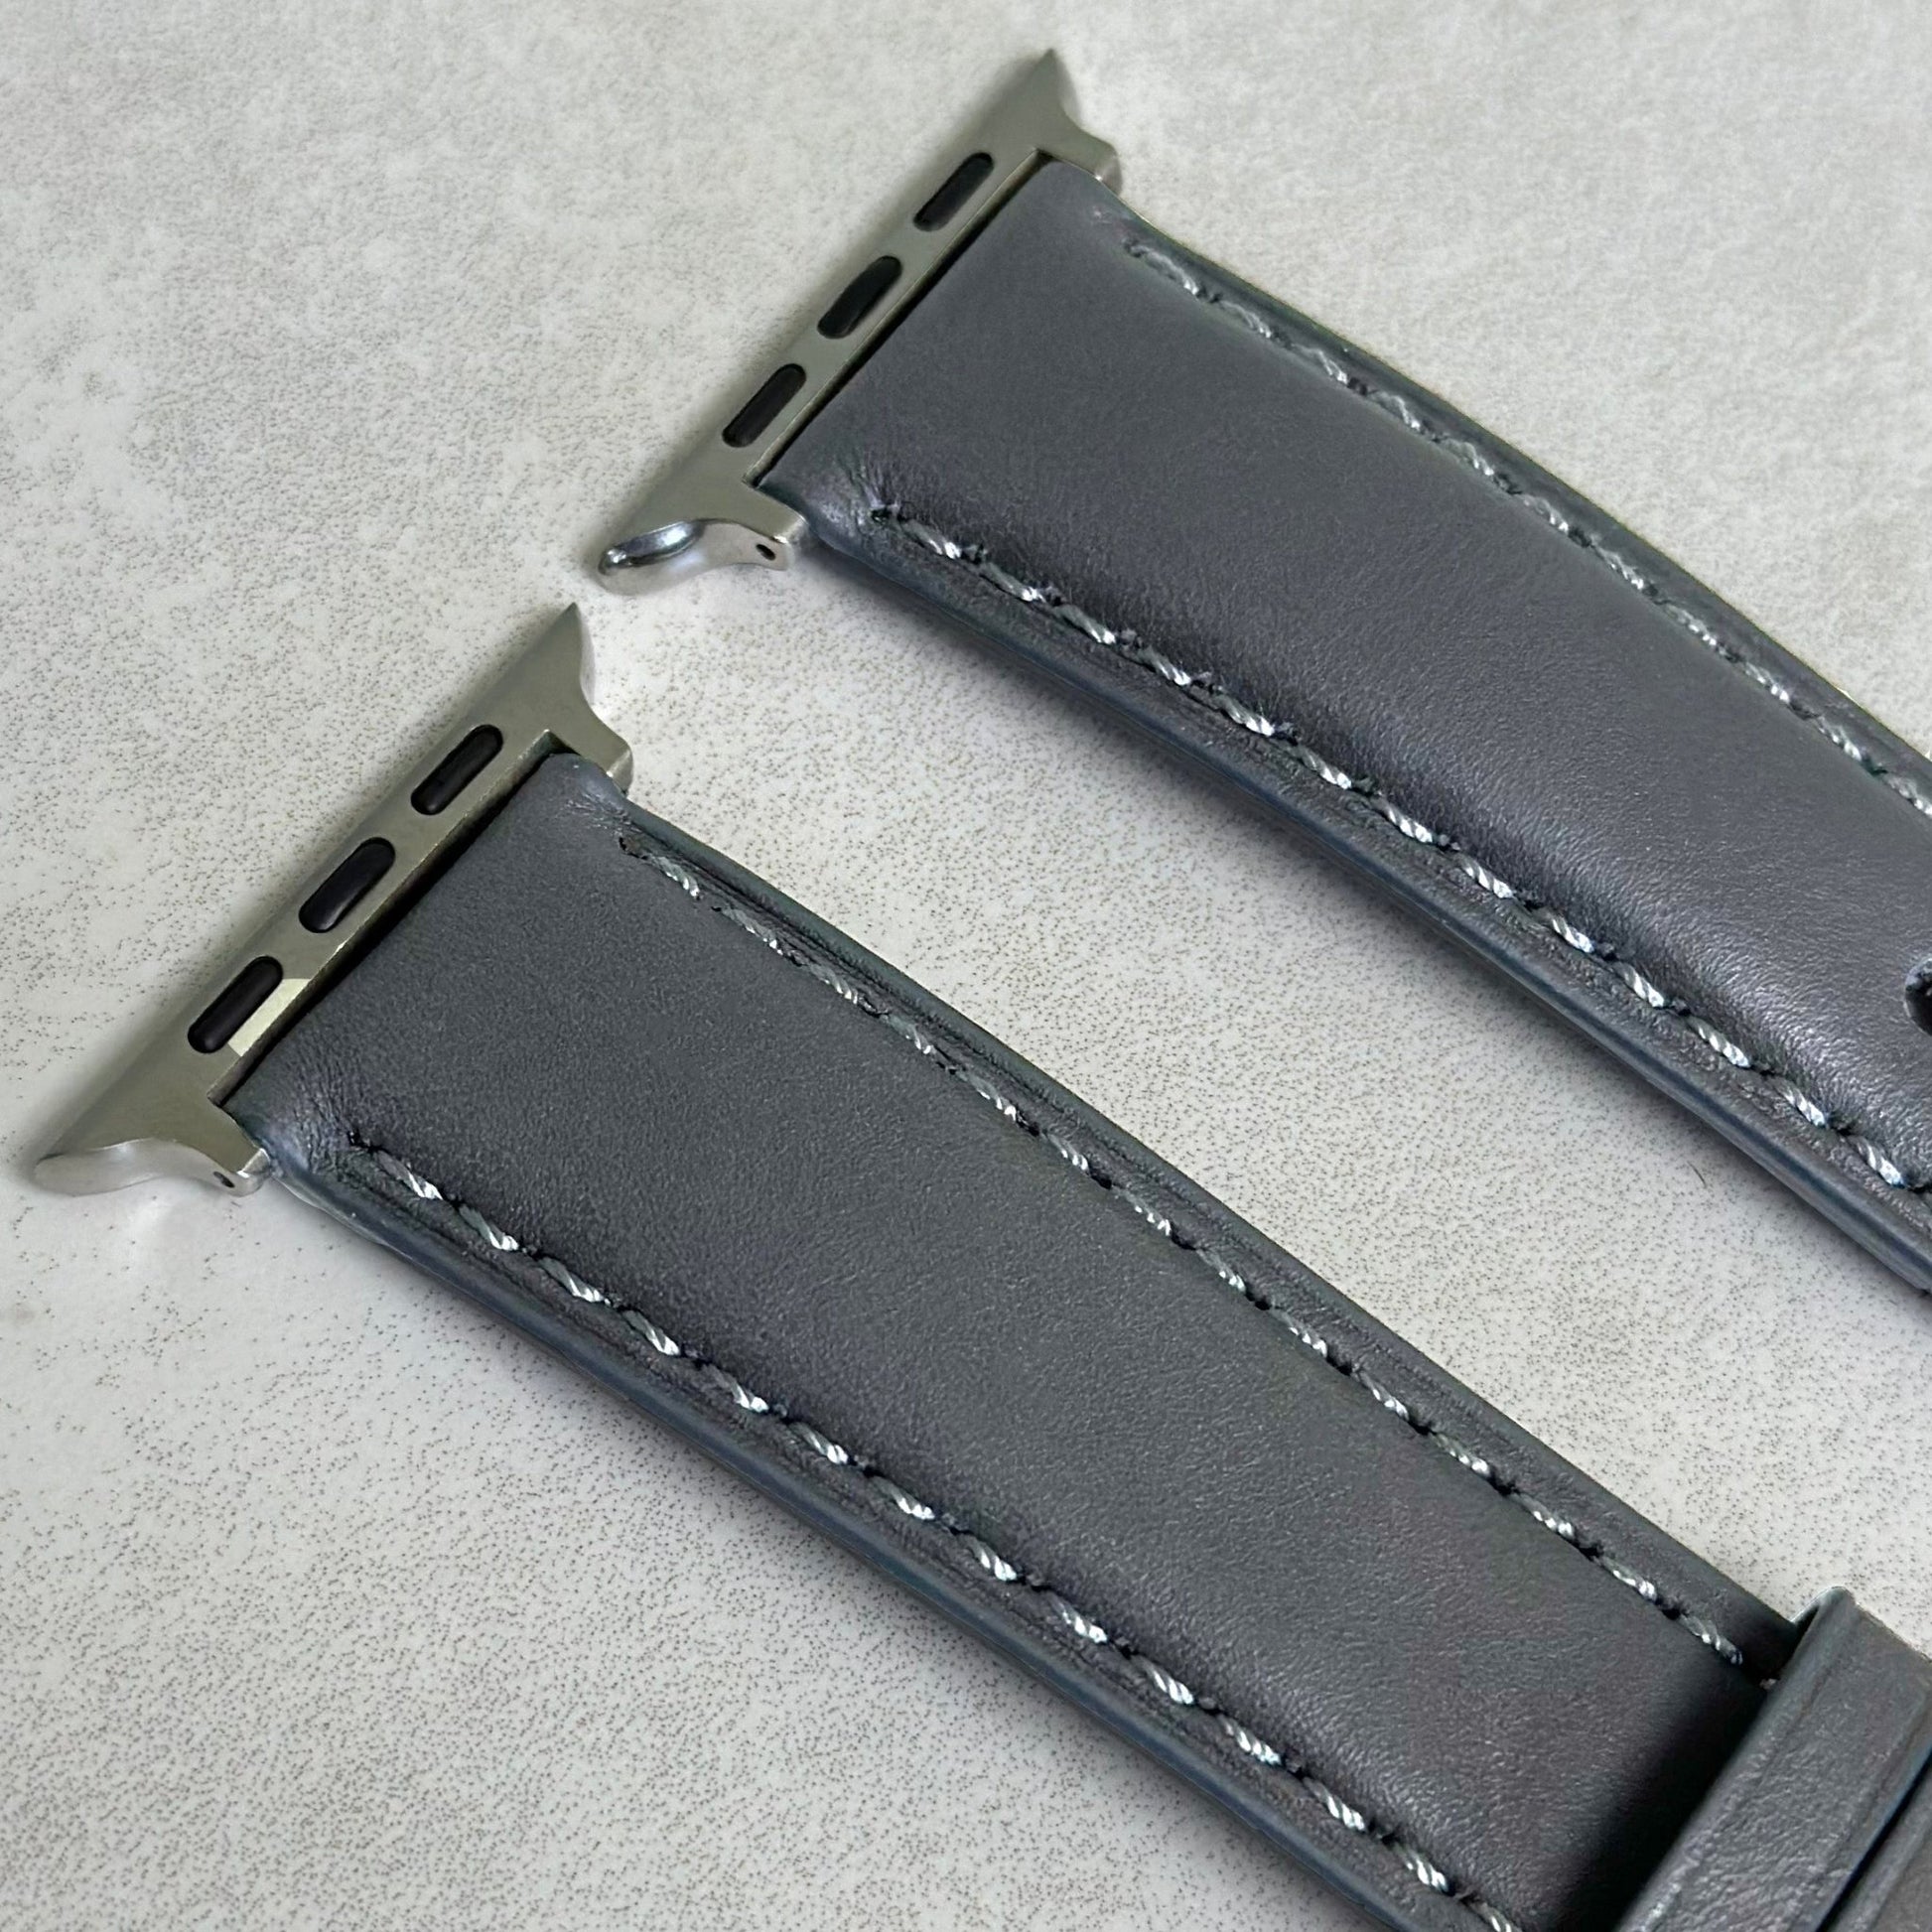 Top of the Athens grey full grain leather Apple Watch strap. Padded leather watch strap. Watch And Strap.